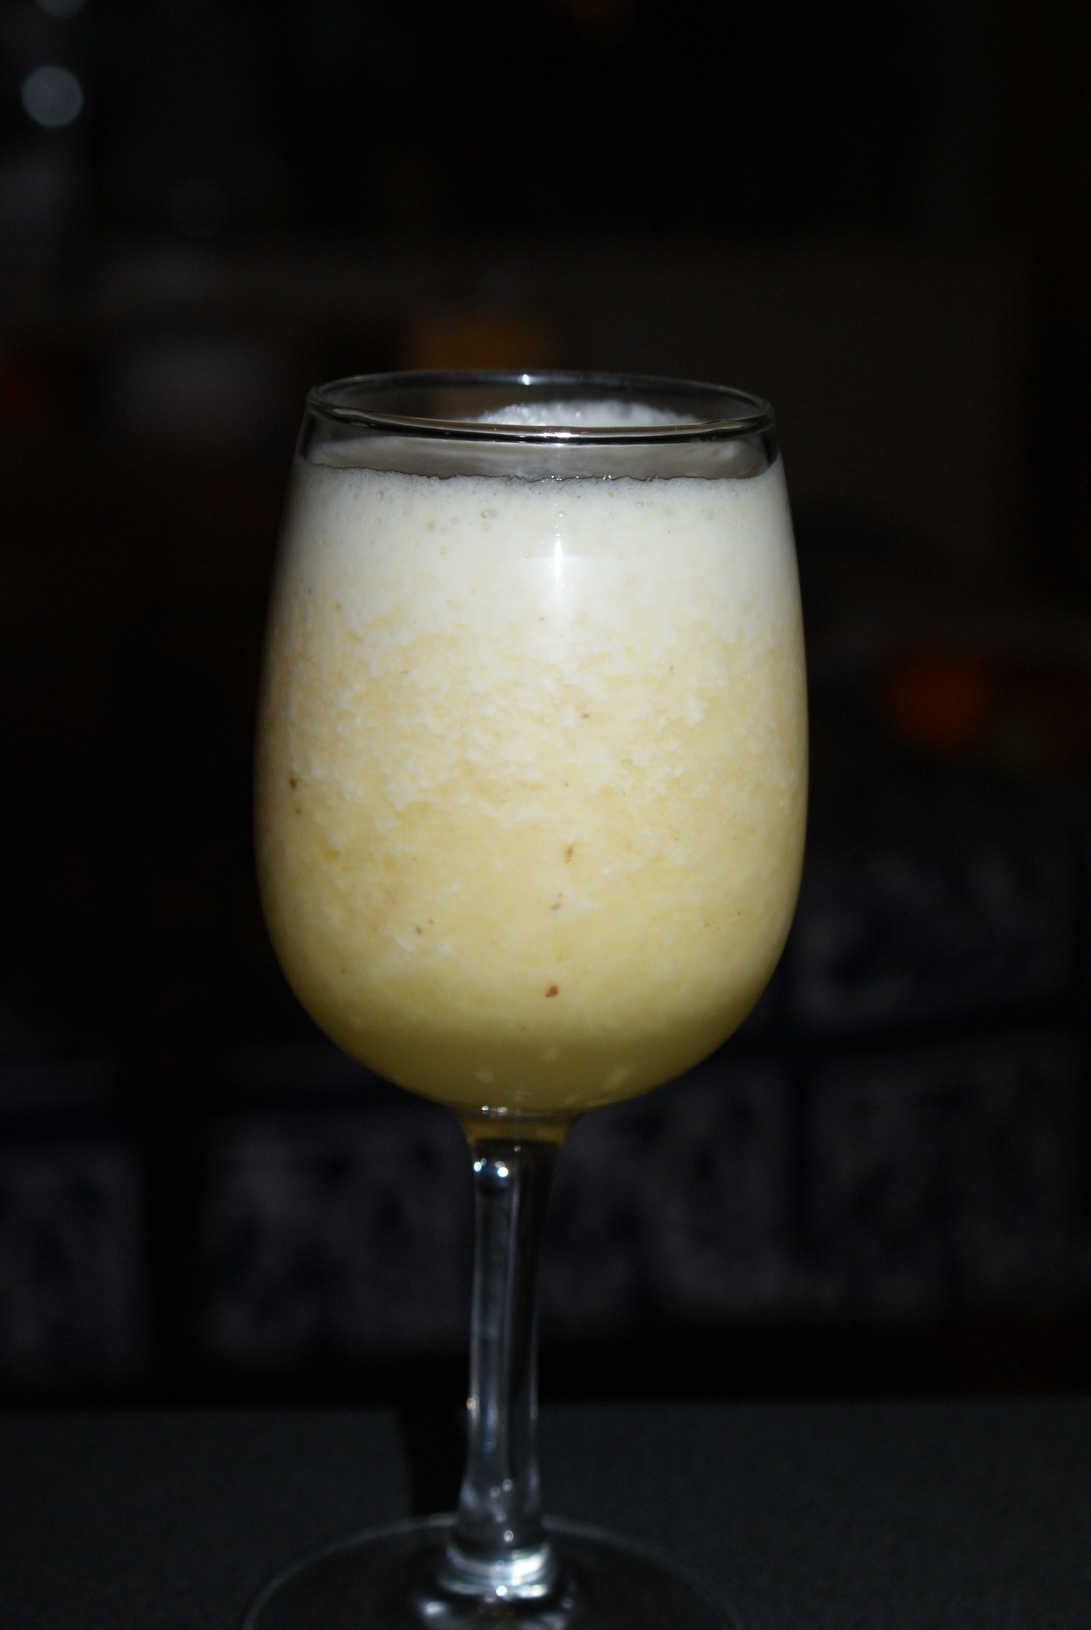 Pineapple Ginger Smoothie